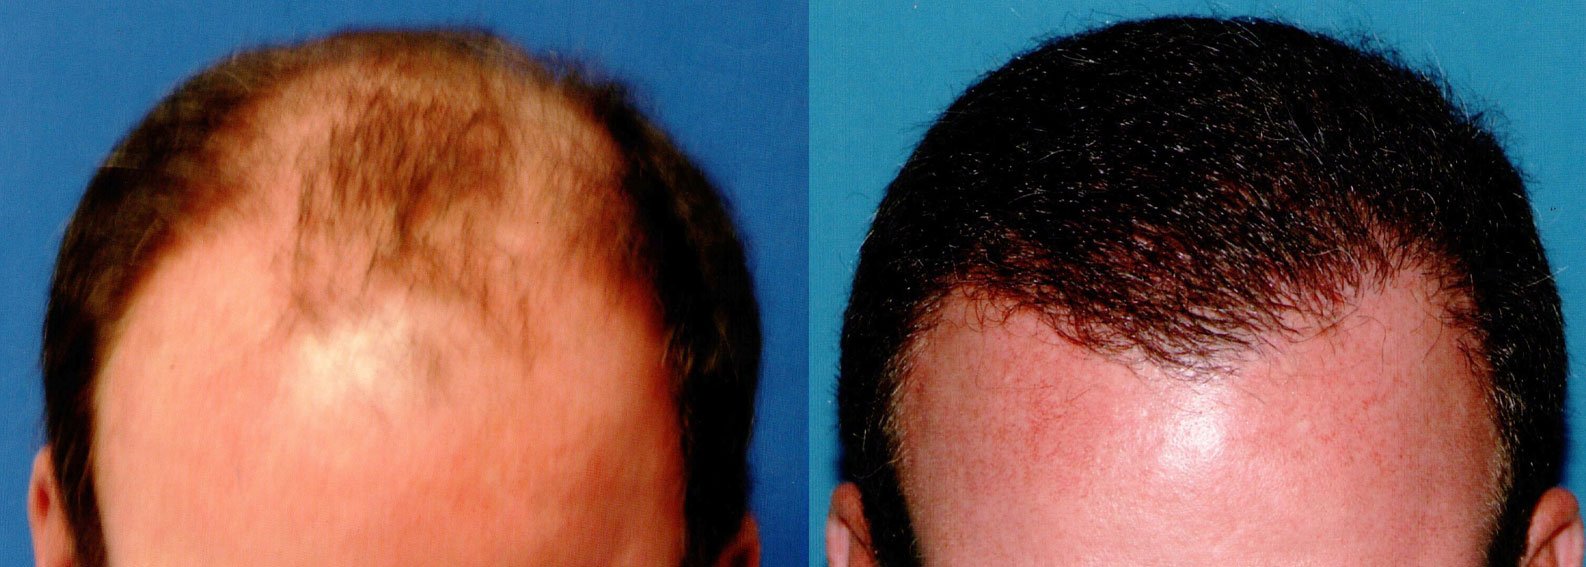 Before & After Photos of FUE Transplant with amazing results. Follicular Unit Excision creates natural looking results.